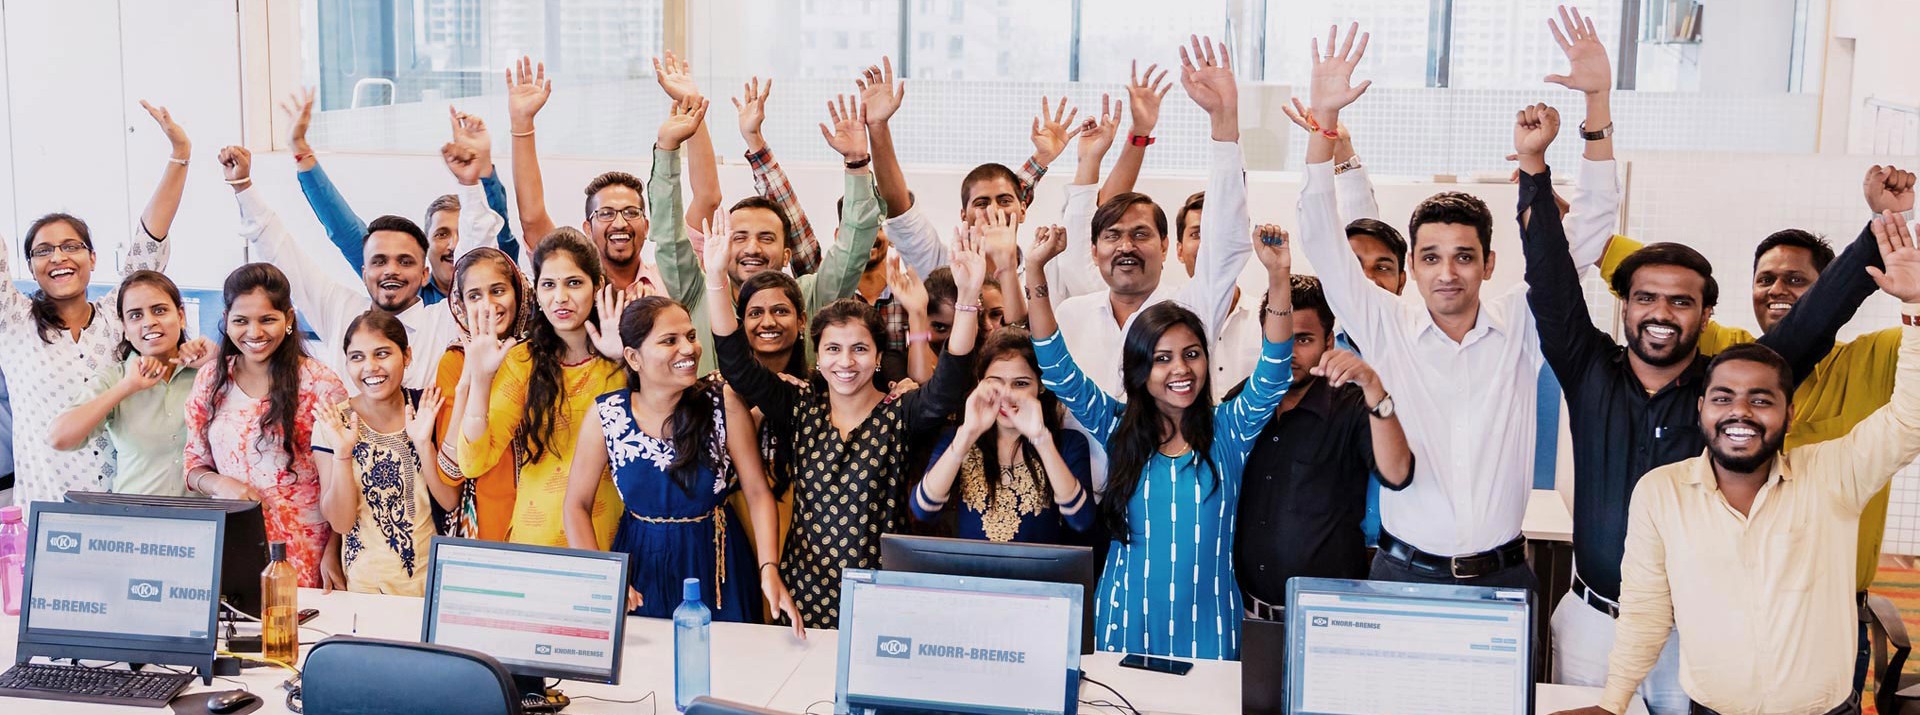 Jubilant Technology Center India employees in their office.